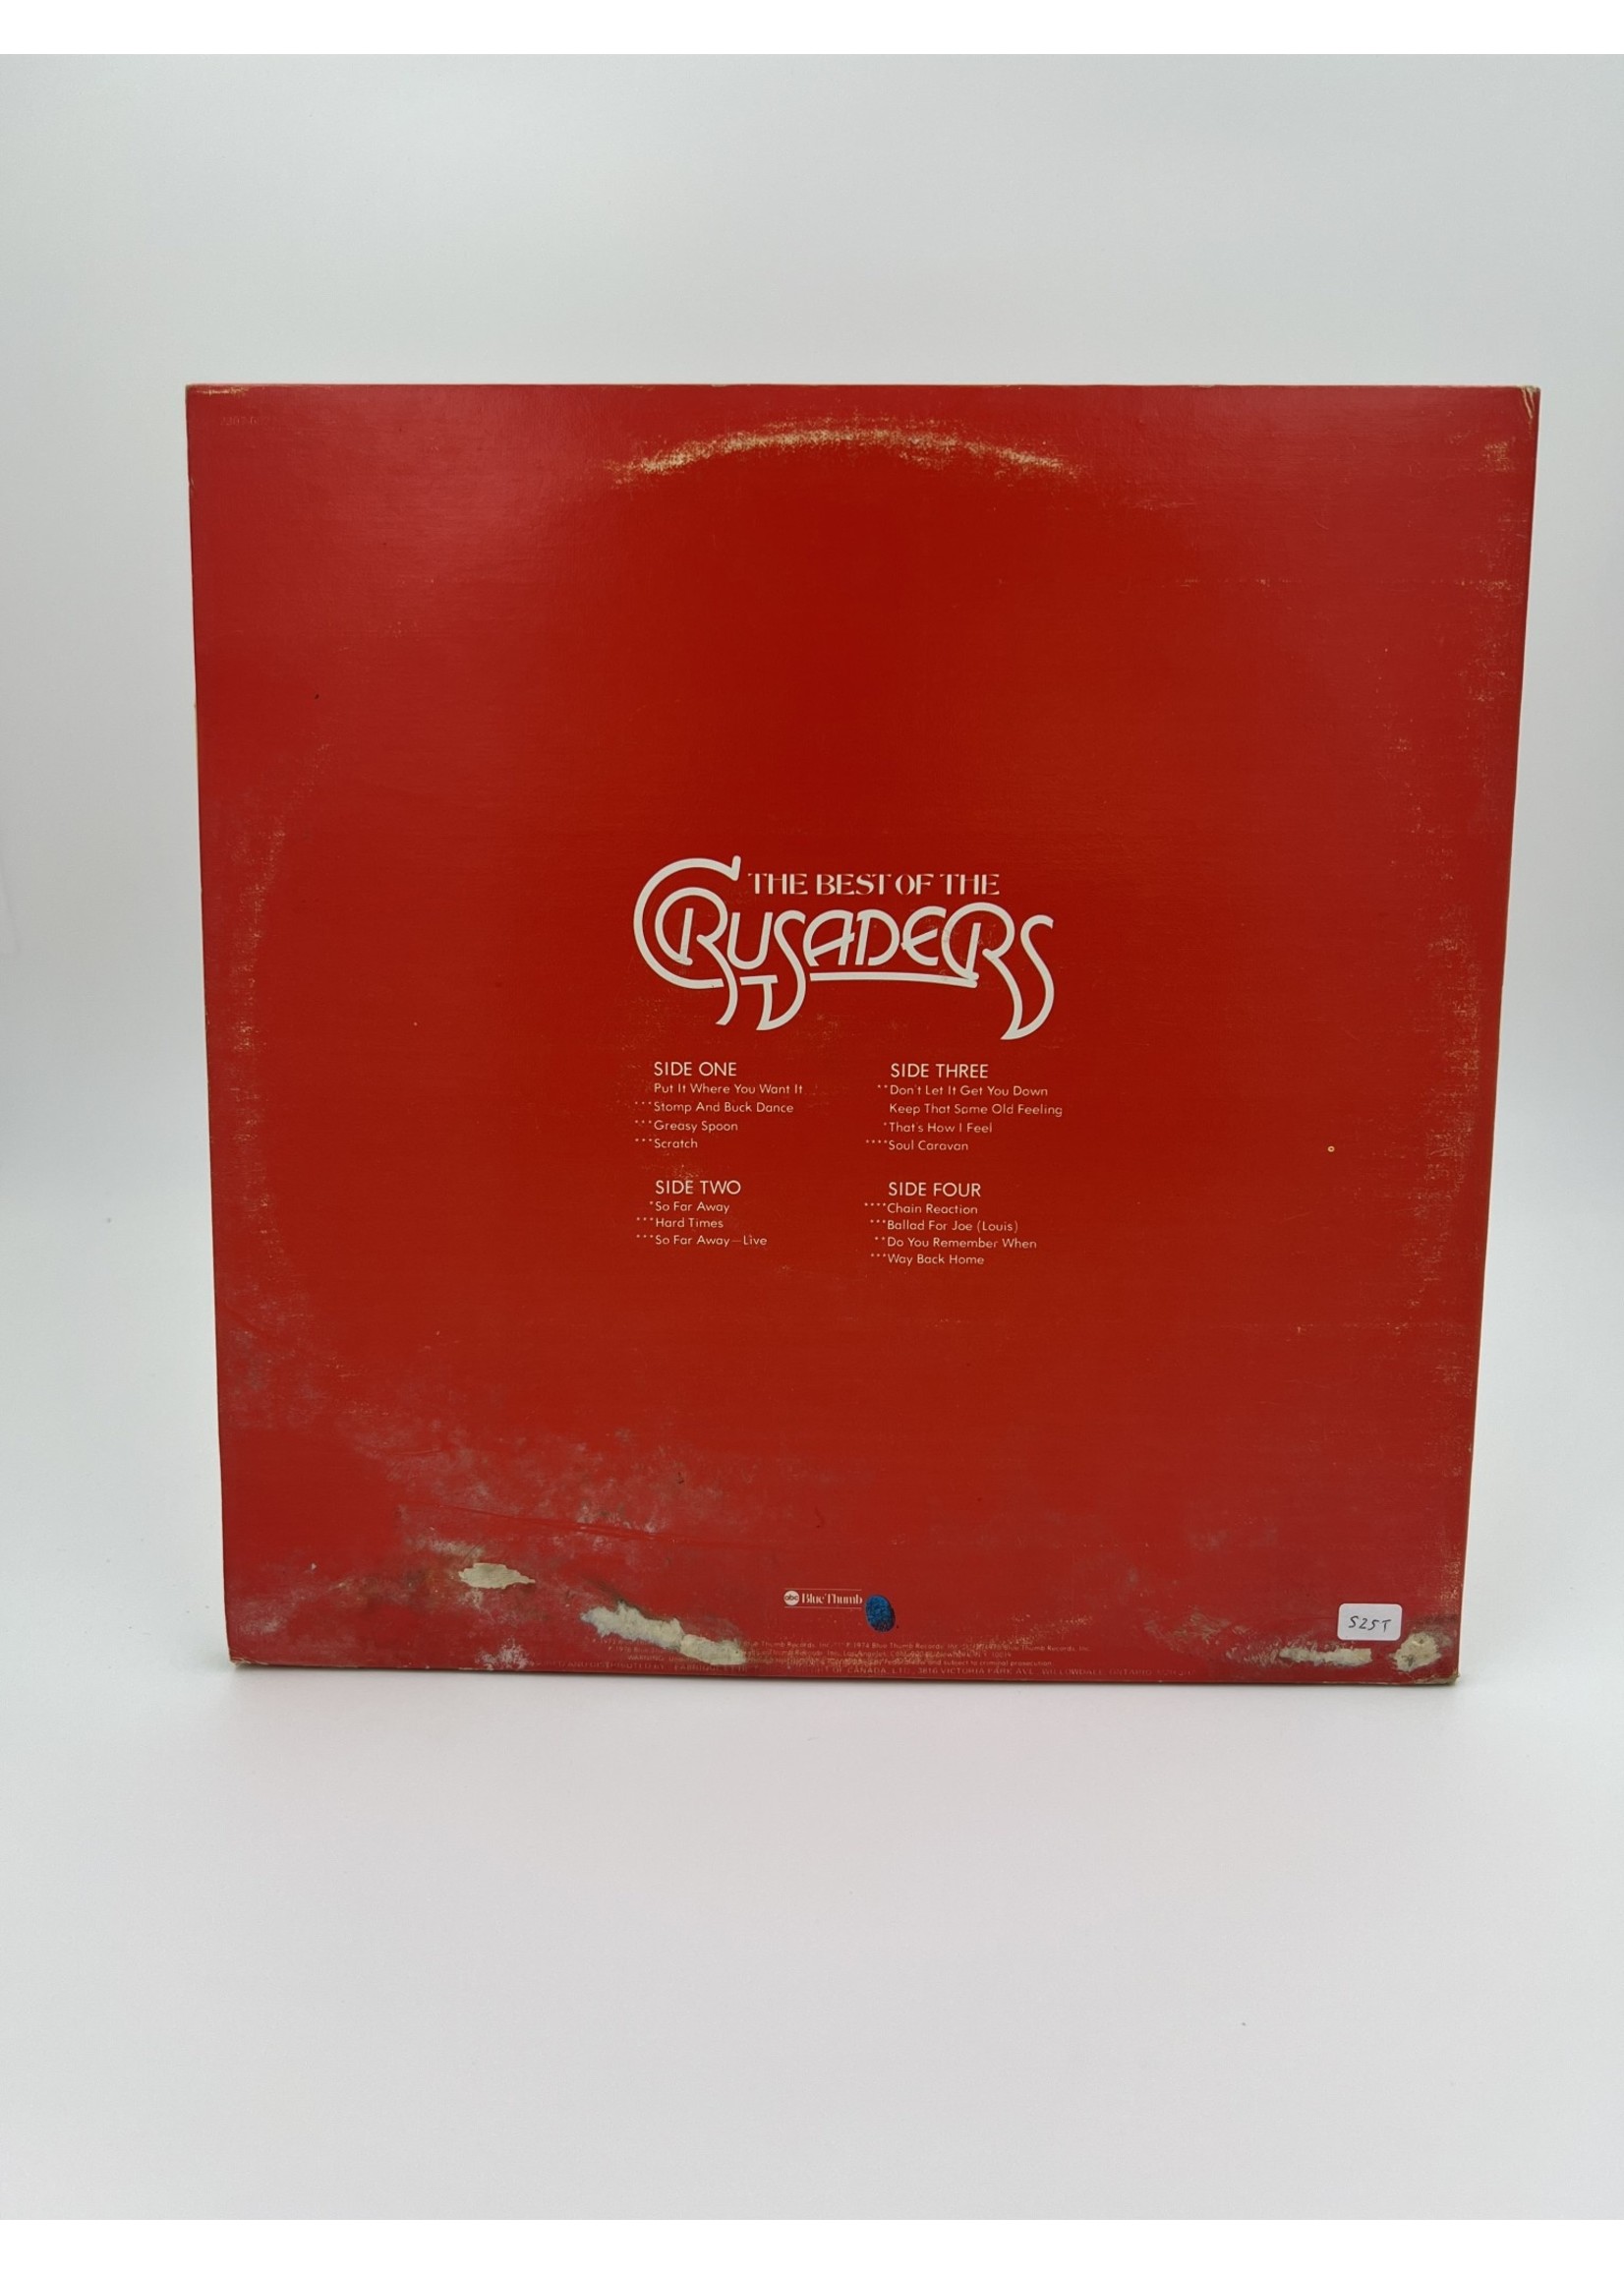 LP The Best Of The Crusaders LP 2 RECORD